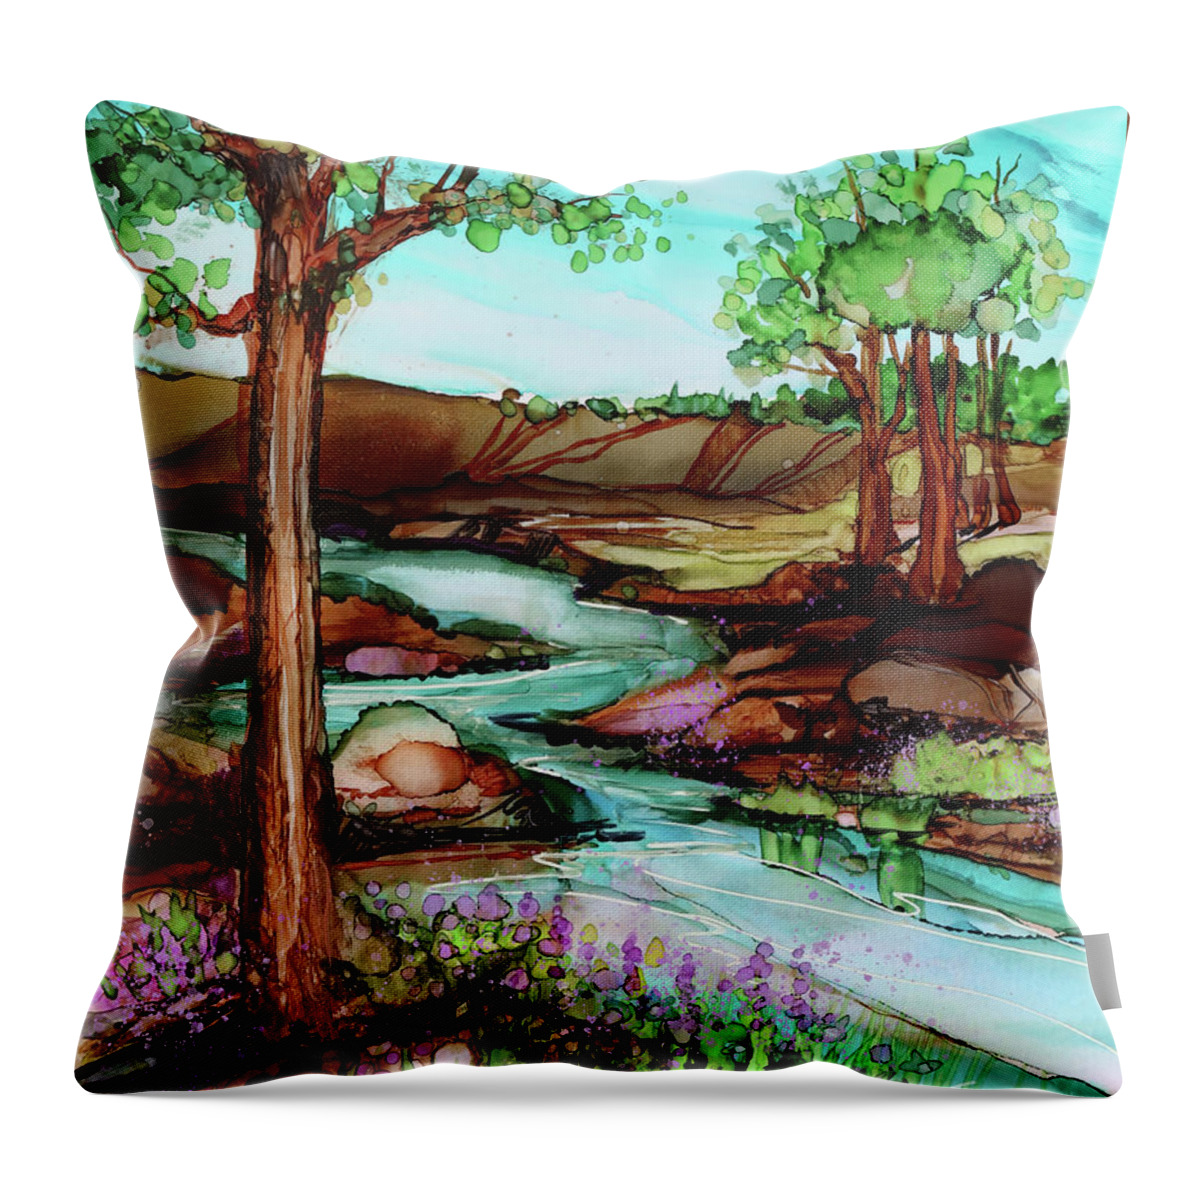  Throw Pillow featuring the painting The River Gorge by Julie Tibus